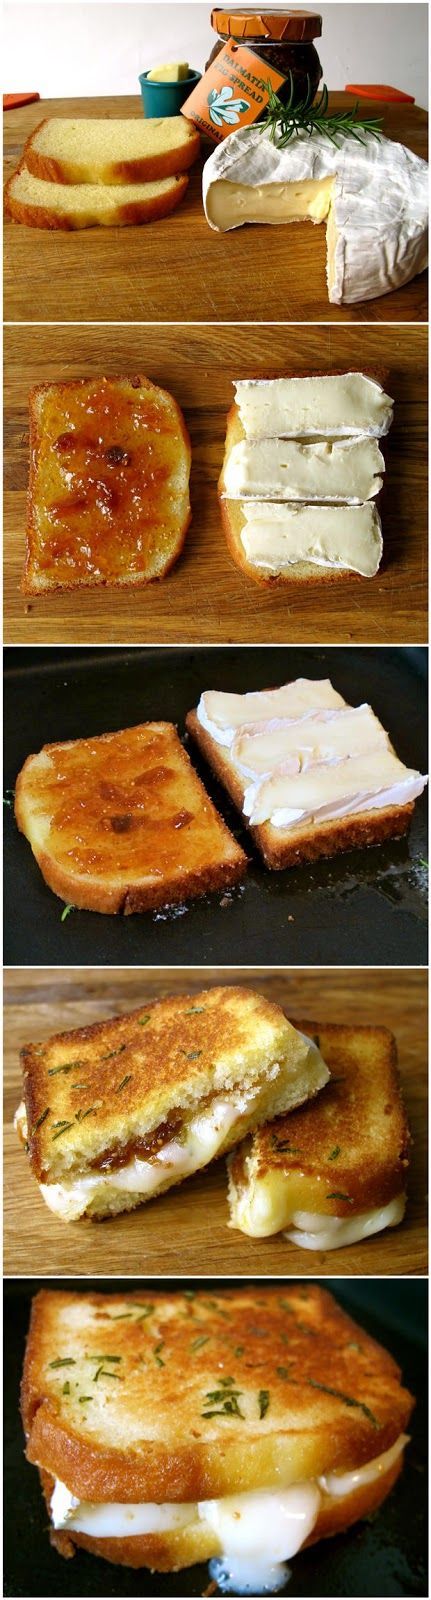 Savory grilled cheese sandw